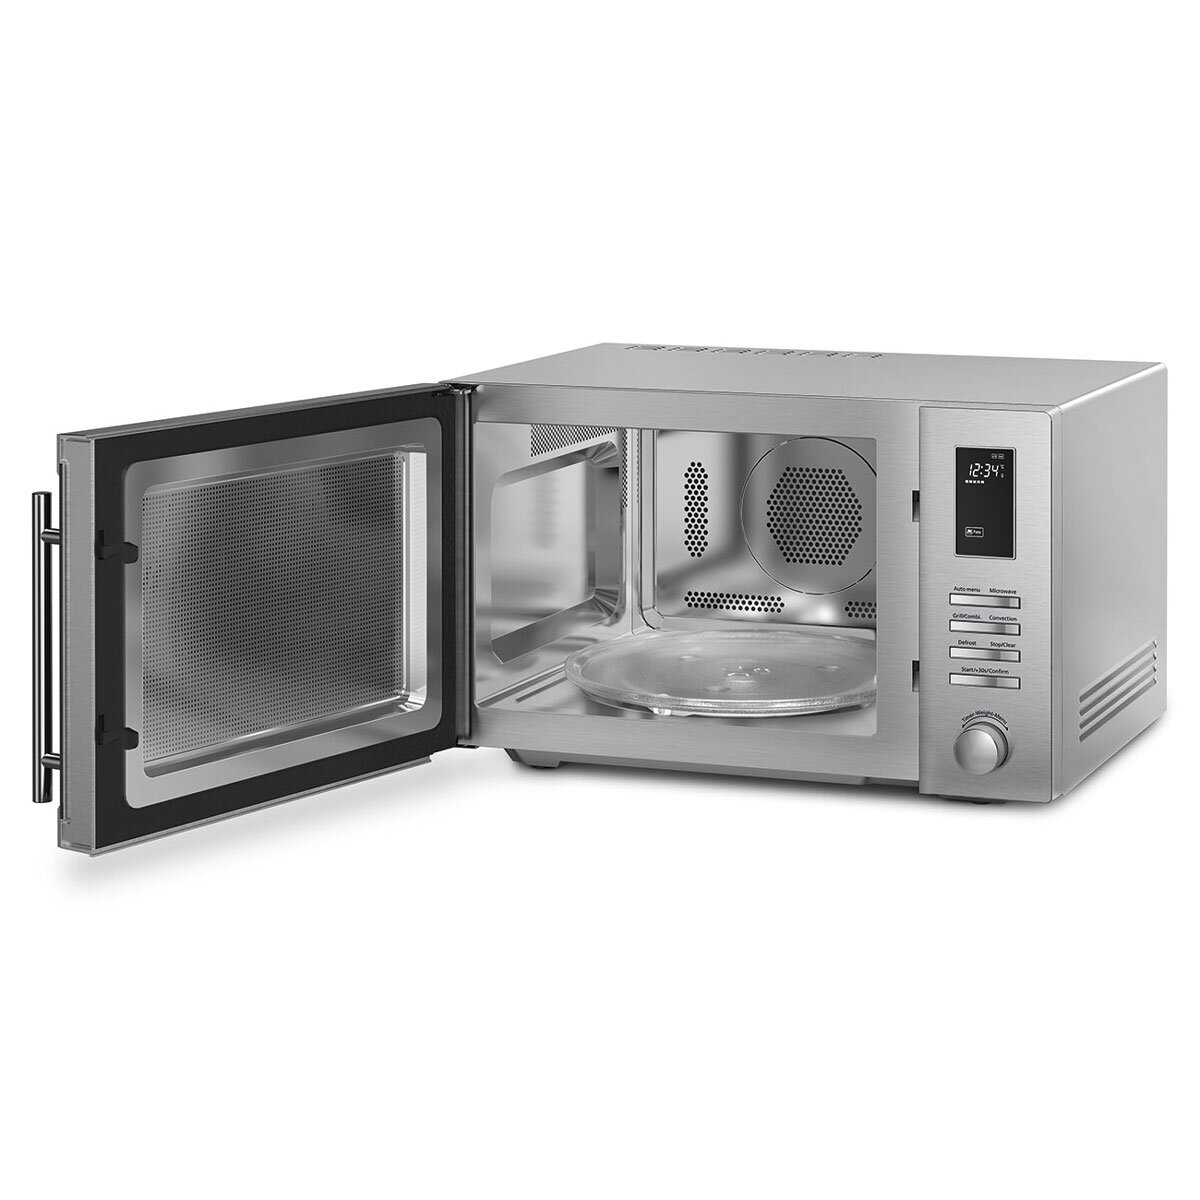 Image of the front of Smeg Microwave with door open